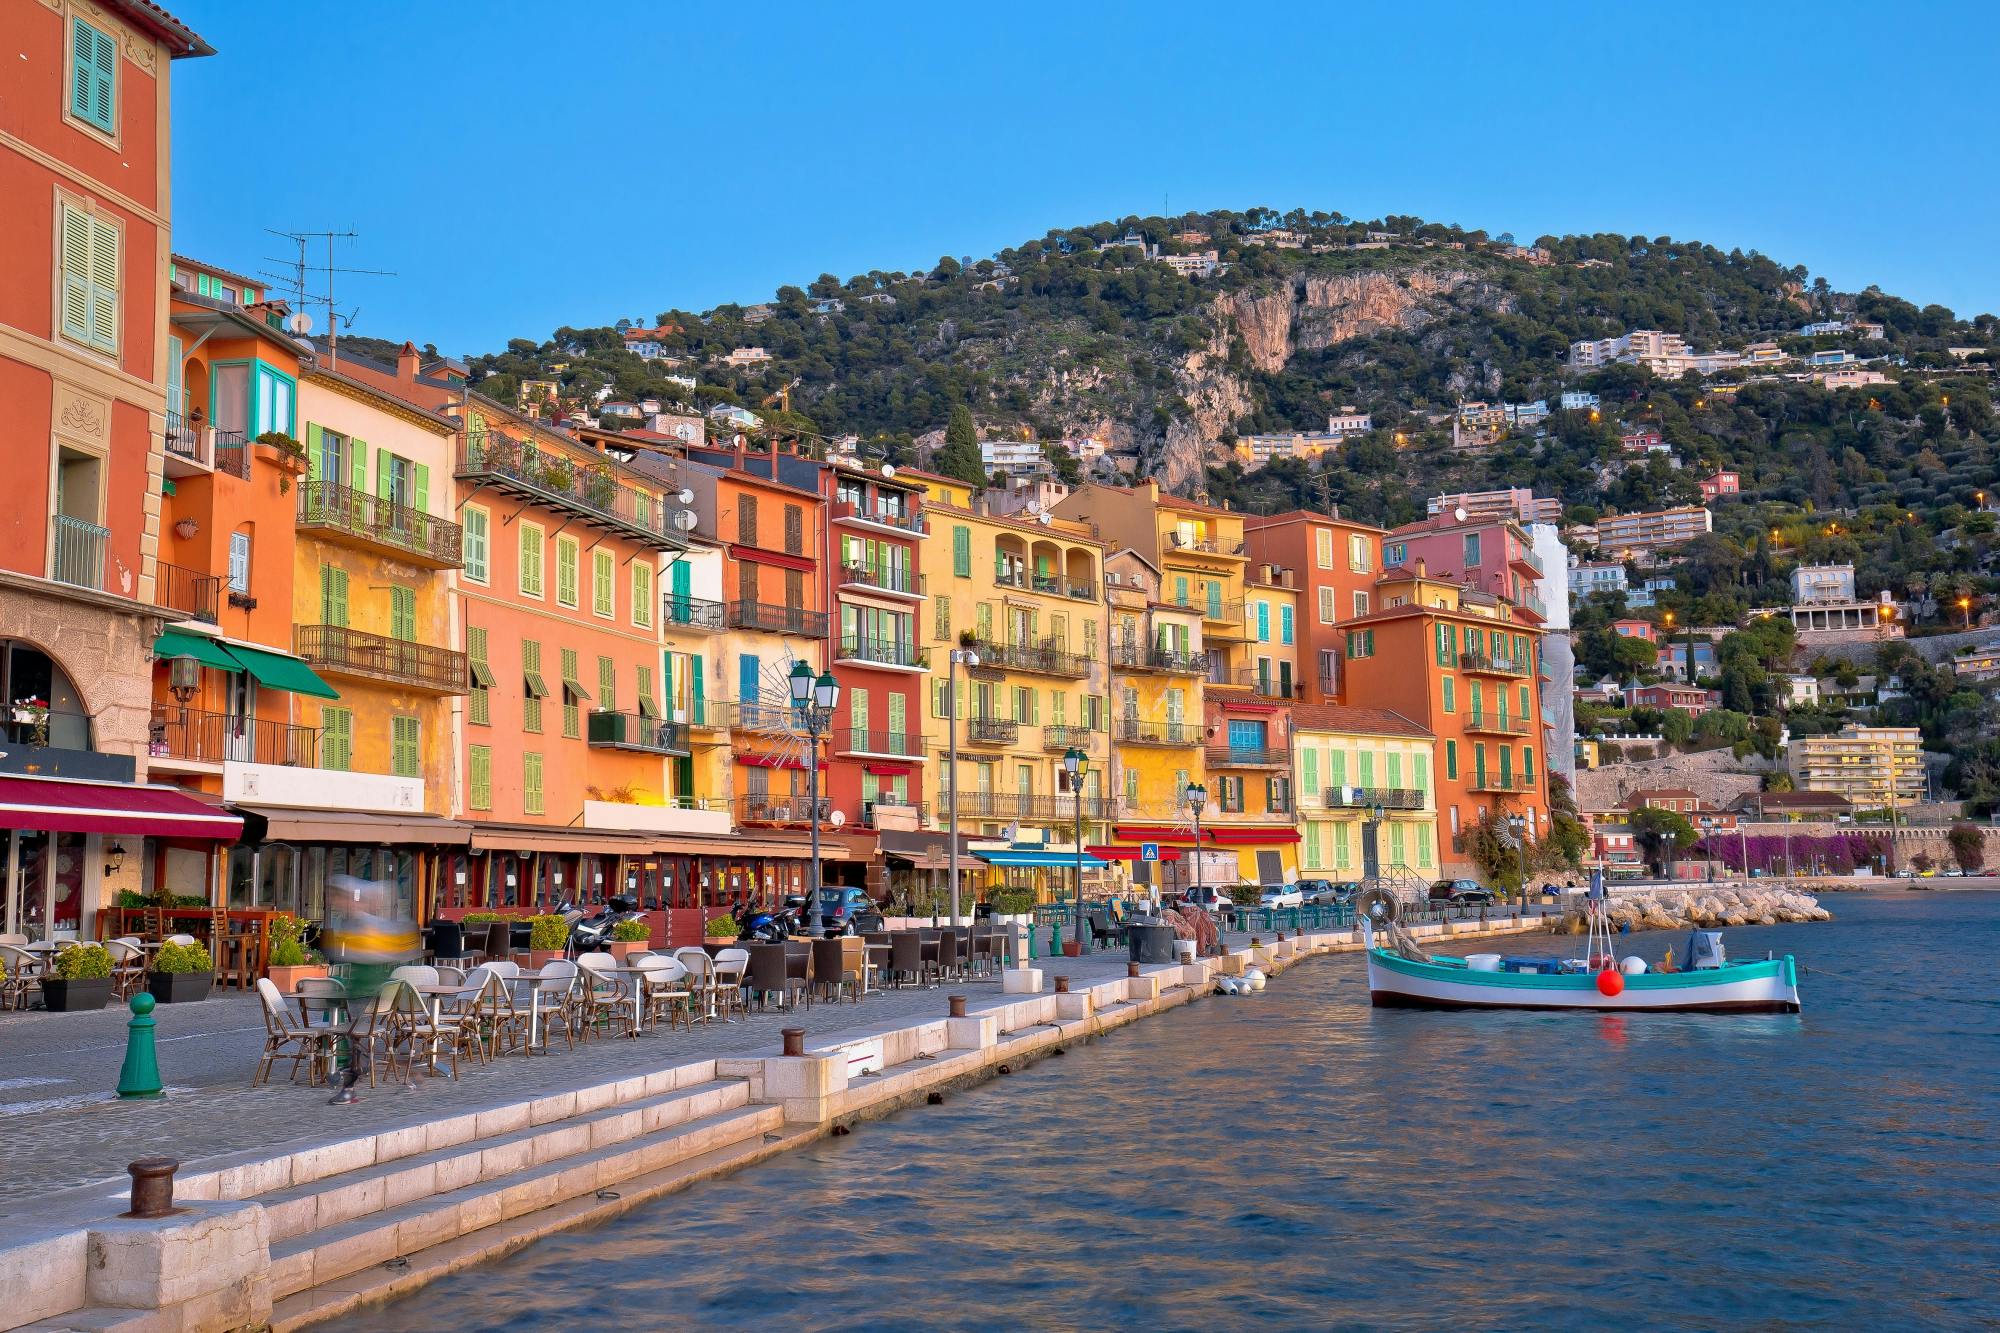 Day trips to Villefranche-sur-Mer